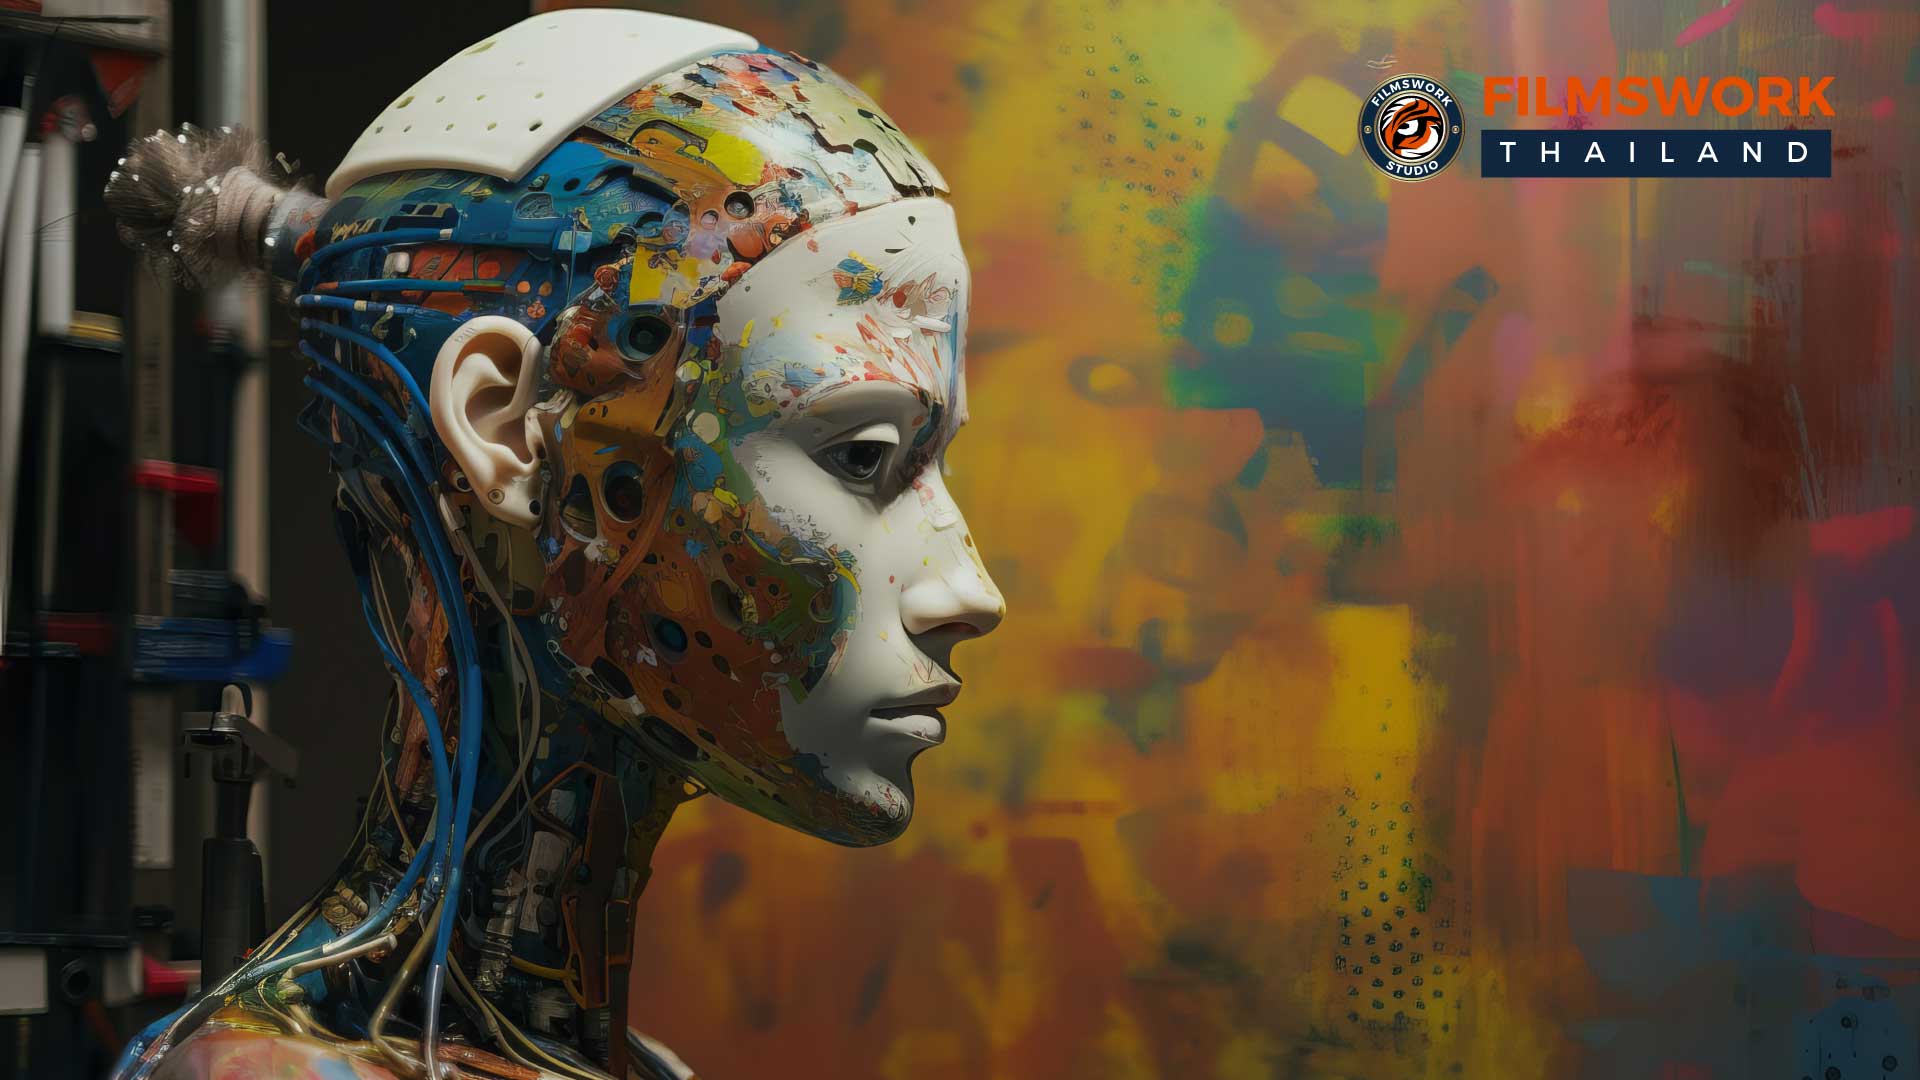 One of the most fascinating applications of AI in art and design is the creation of original artworks. AI algorithms can analyze vast amounts of data, learn patterns, and generate new artistic creations based on that knowledge.